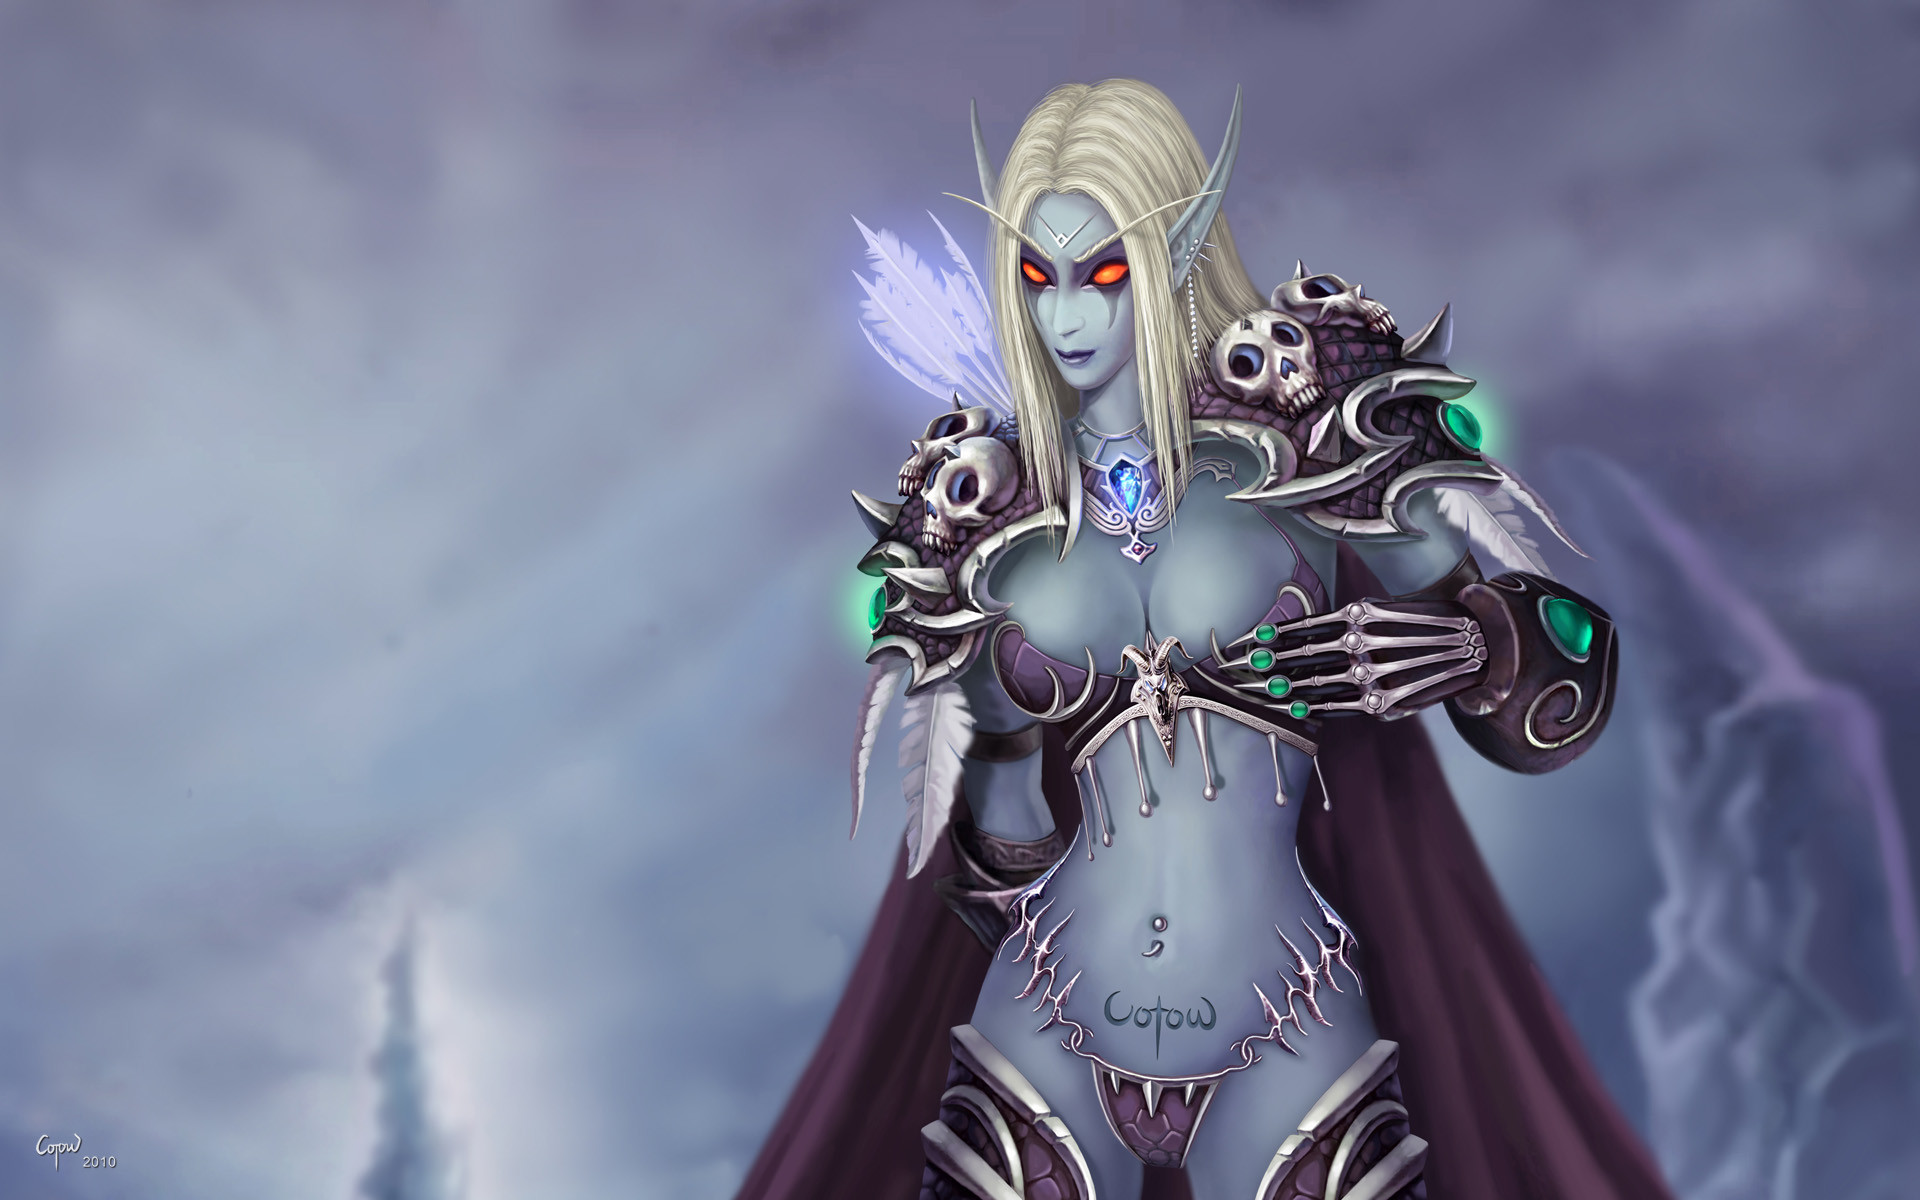 Sylvanas images Lady Sylvanas HD wallpaper and background photos